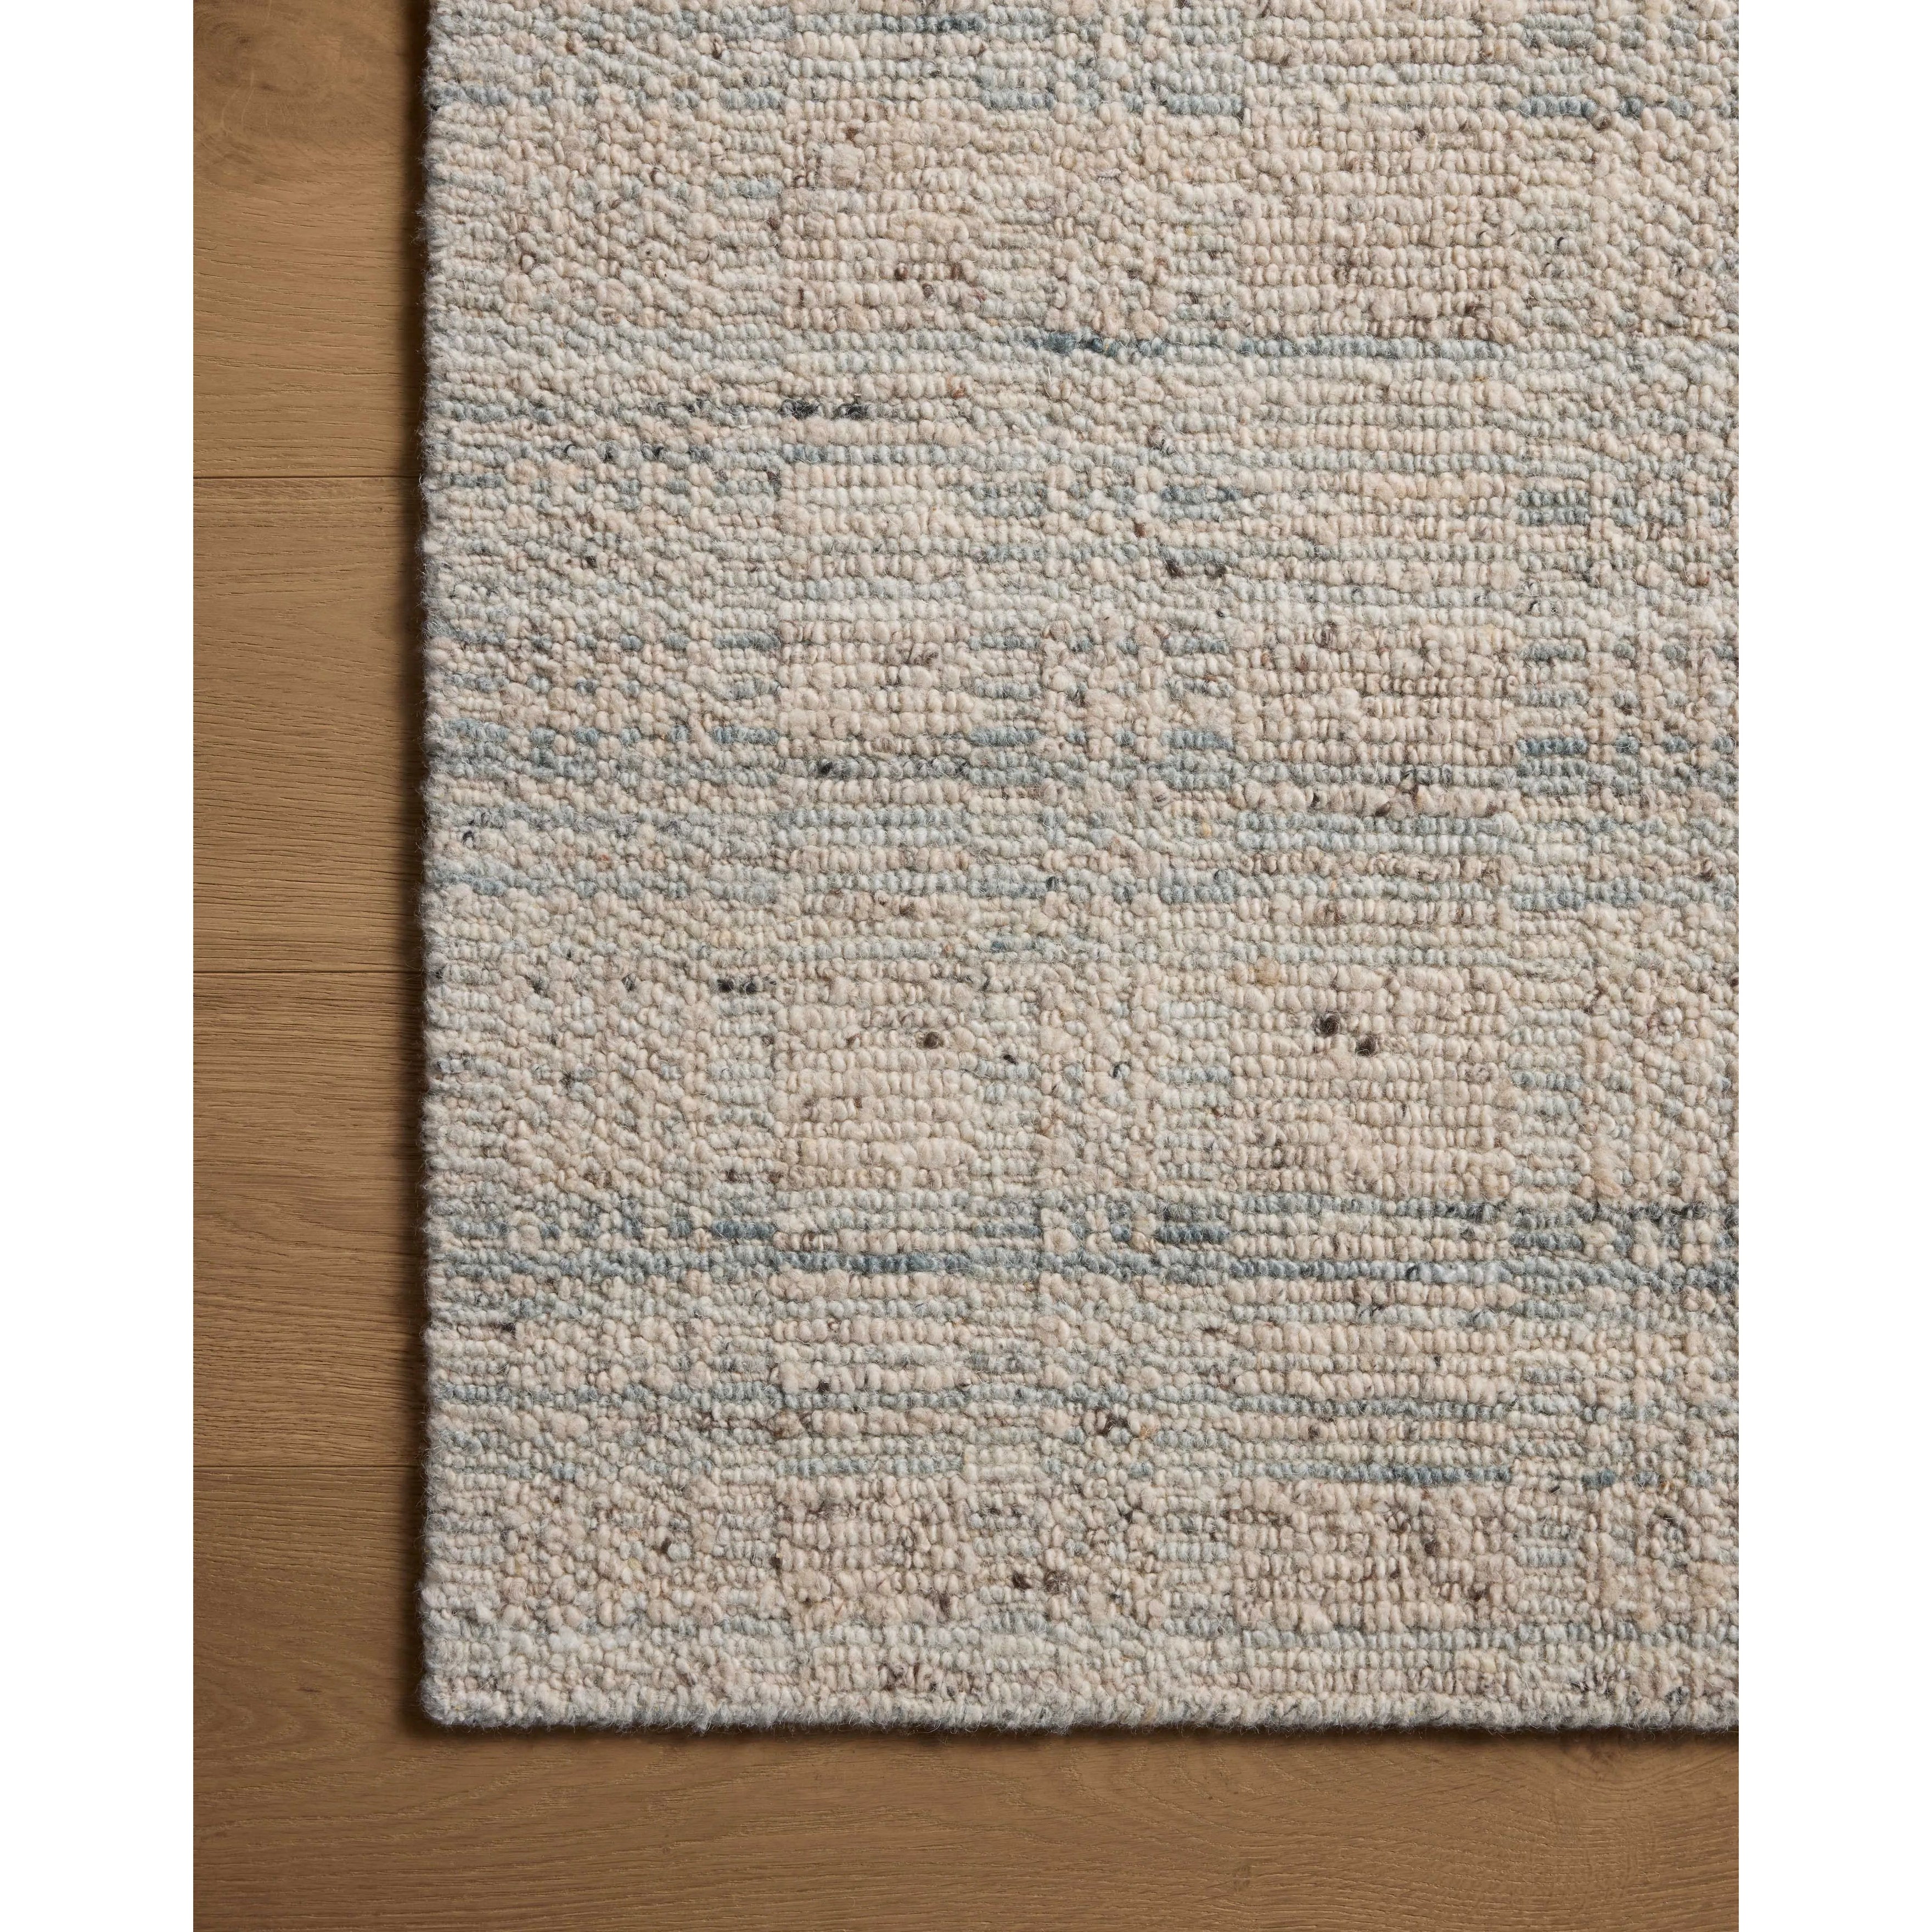 The Sonya Mist / Oatmeal Rug is a hand-loomed area rug with a light, airy palette and understated graphic design. The rug’s textural pile is a soft blend of wool and nylon that creates dimension in living rooms, bedrooms, and more. Amethyst Home provides interior design, new home construction design consulting, vintage area rugs, and lighting in the Charlotte metro area.